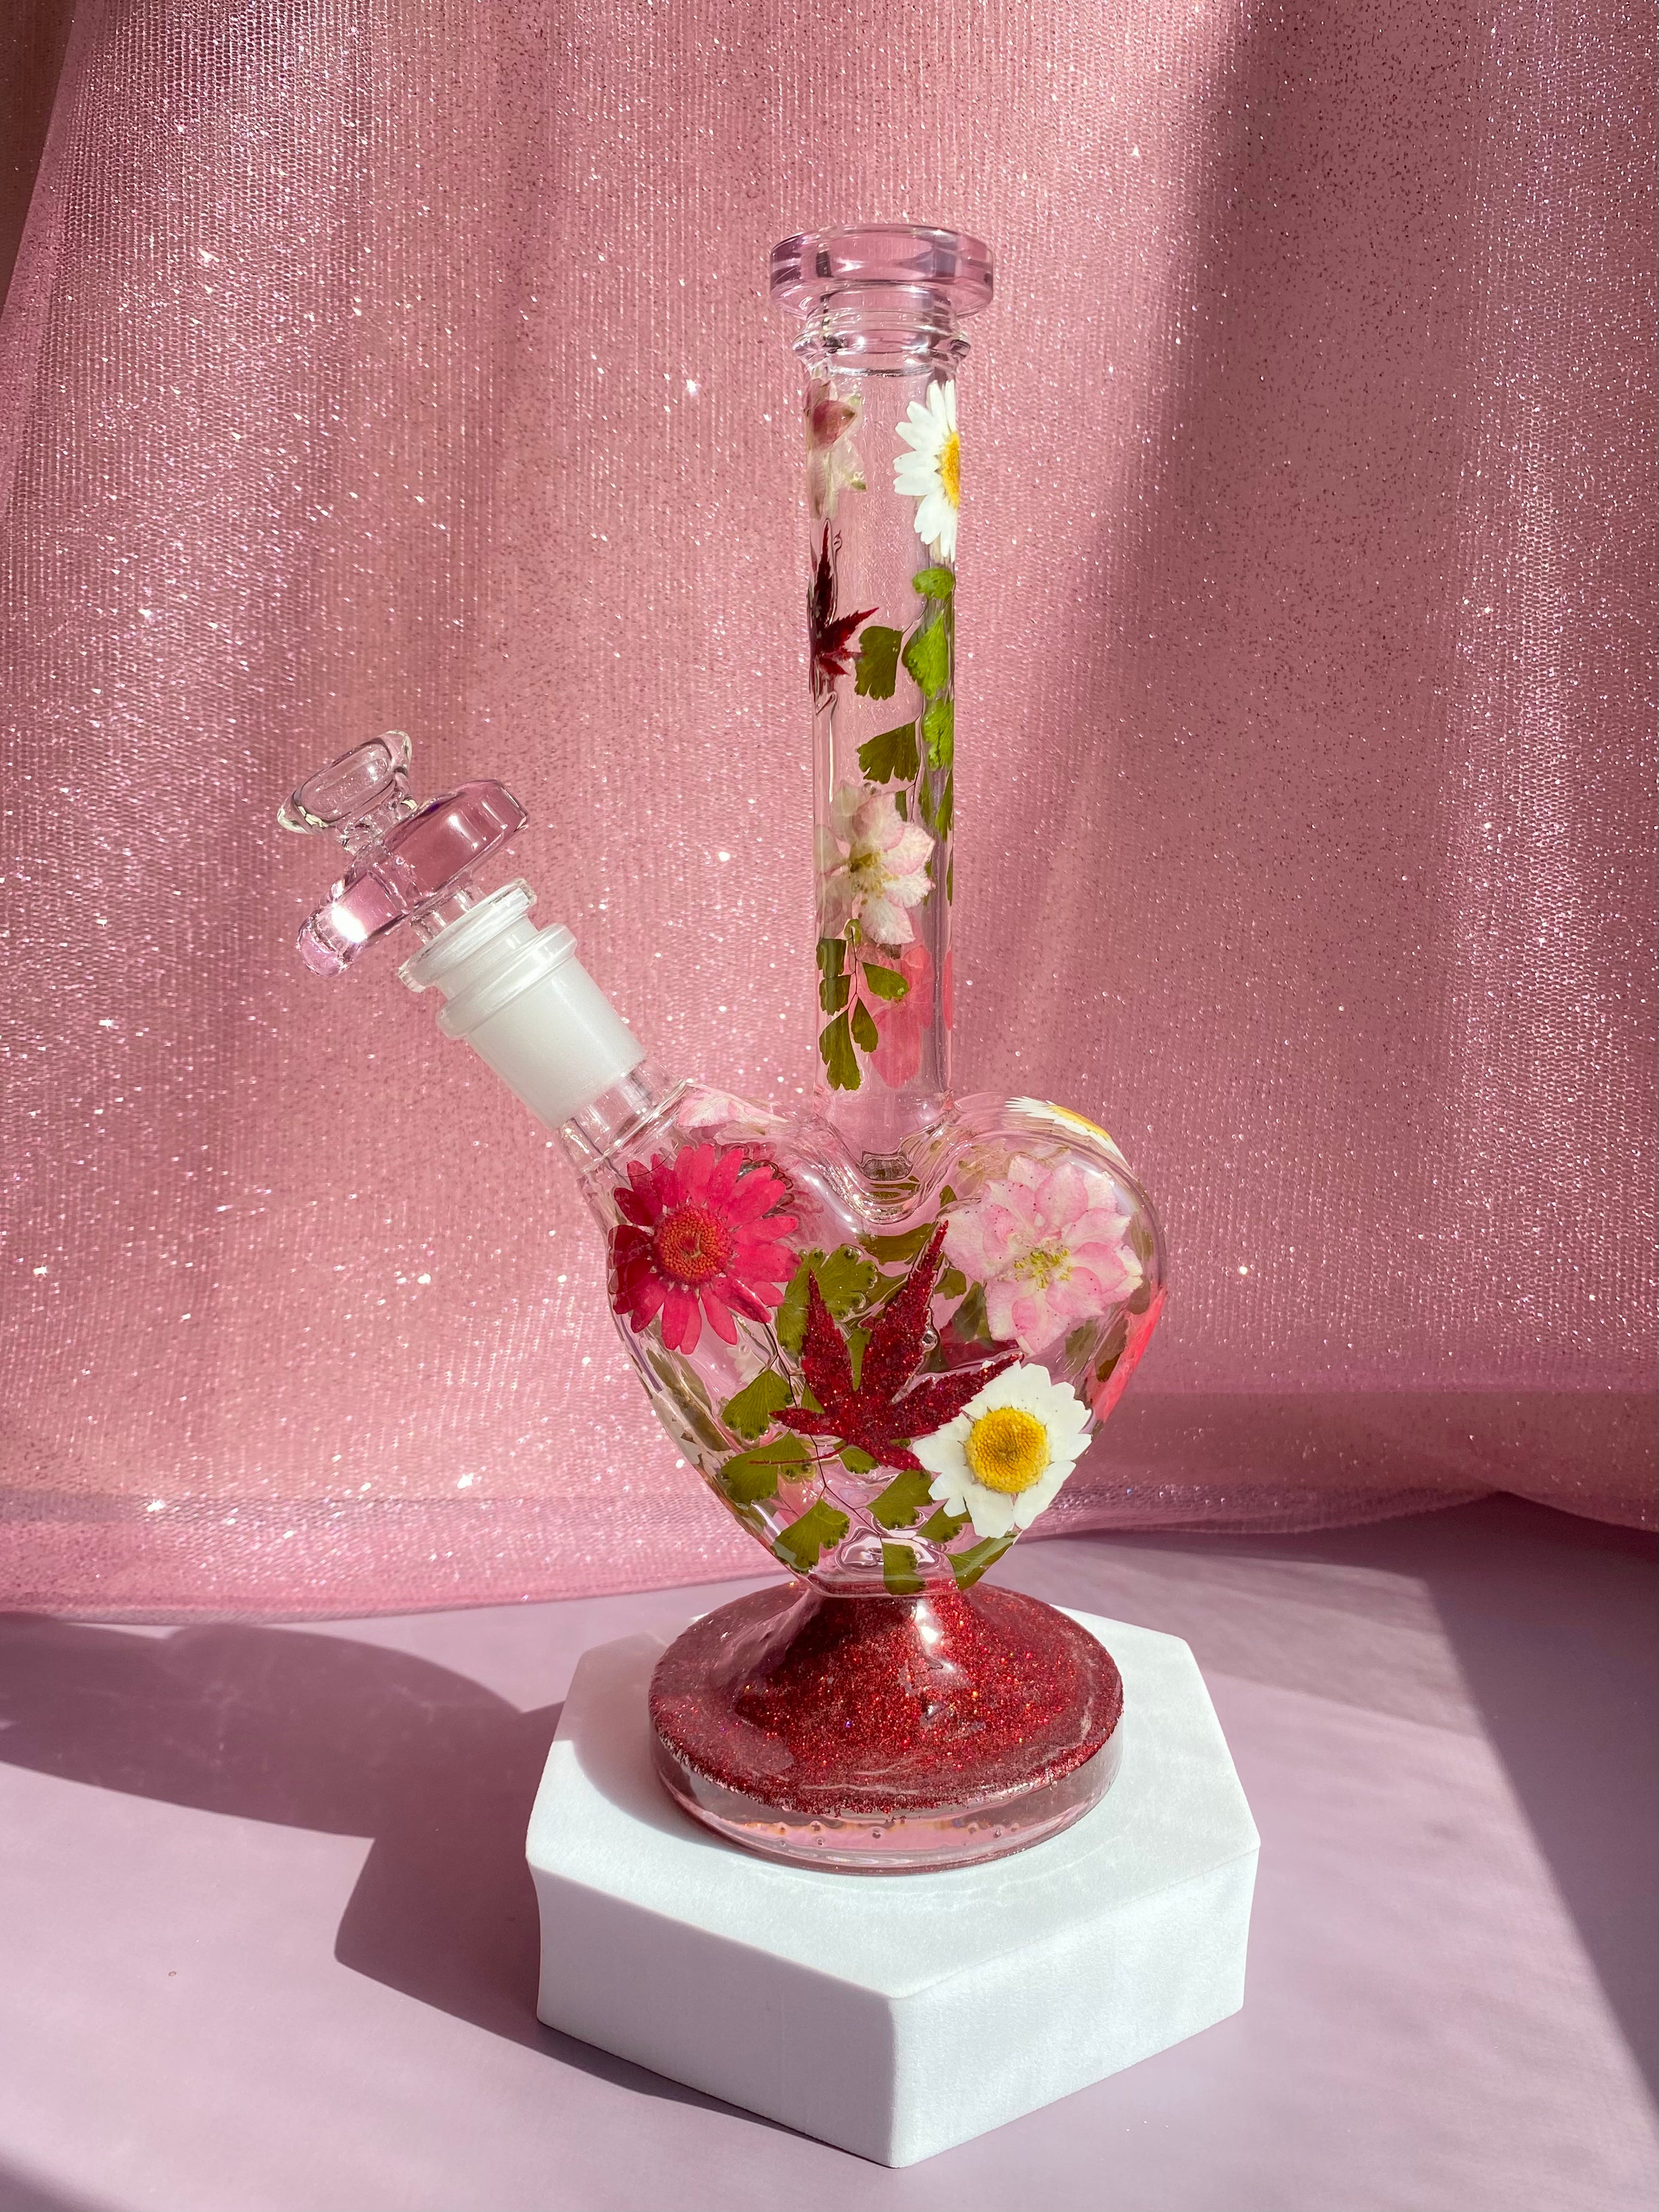 PINK HEART BONG with matching heart bowl – Canna Style